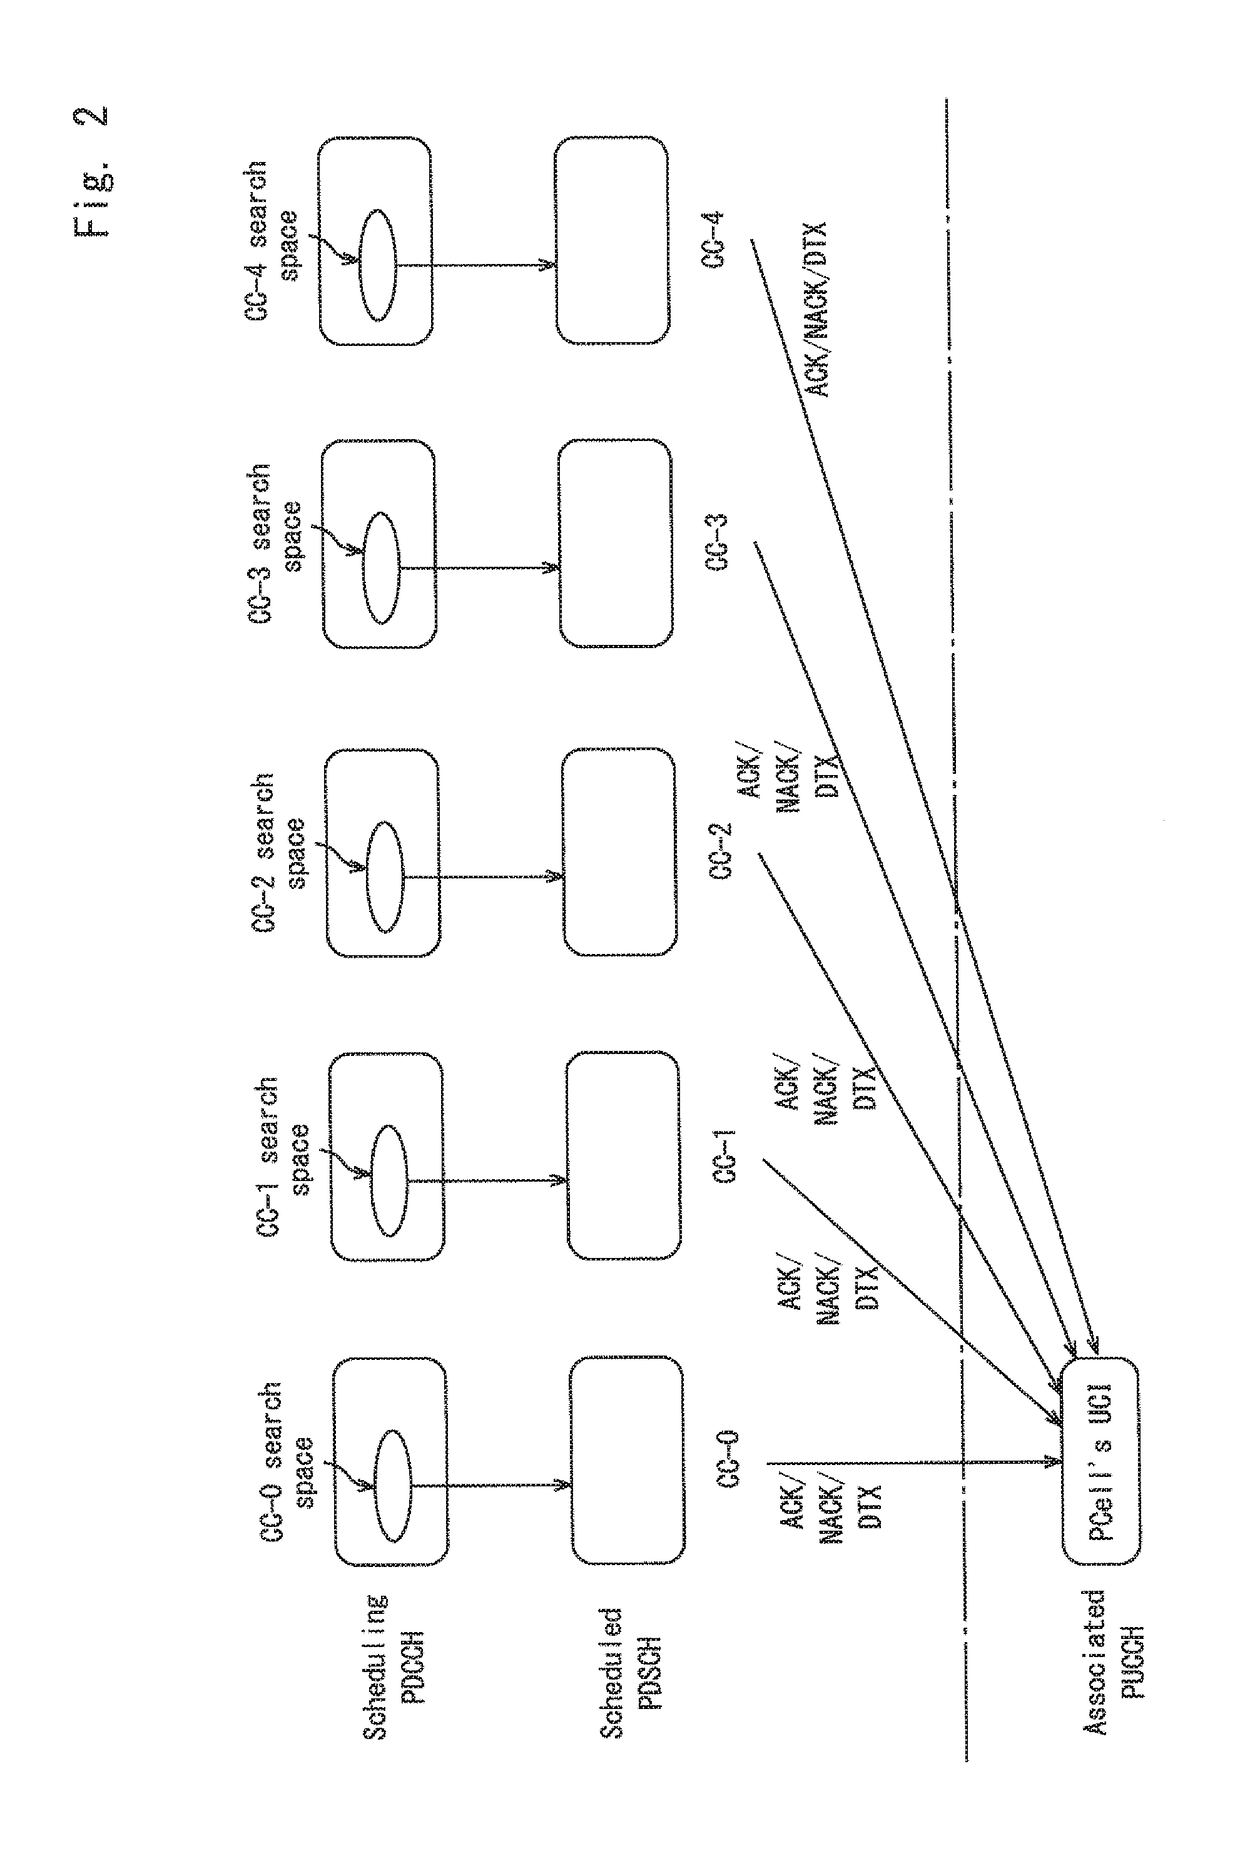 Method for realizing eca supporting up to 32 ccs and enhancing dynamic pucch resource allocation for associated use